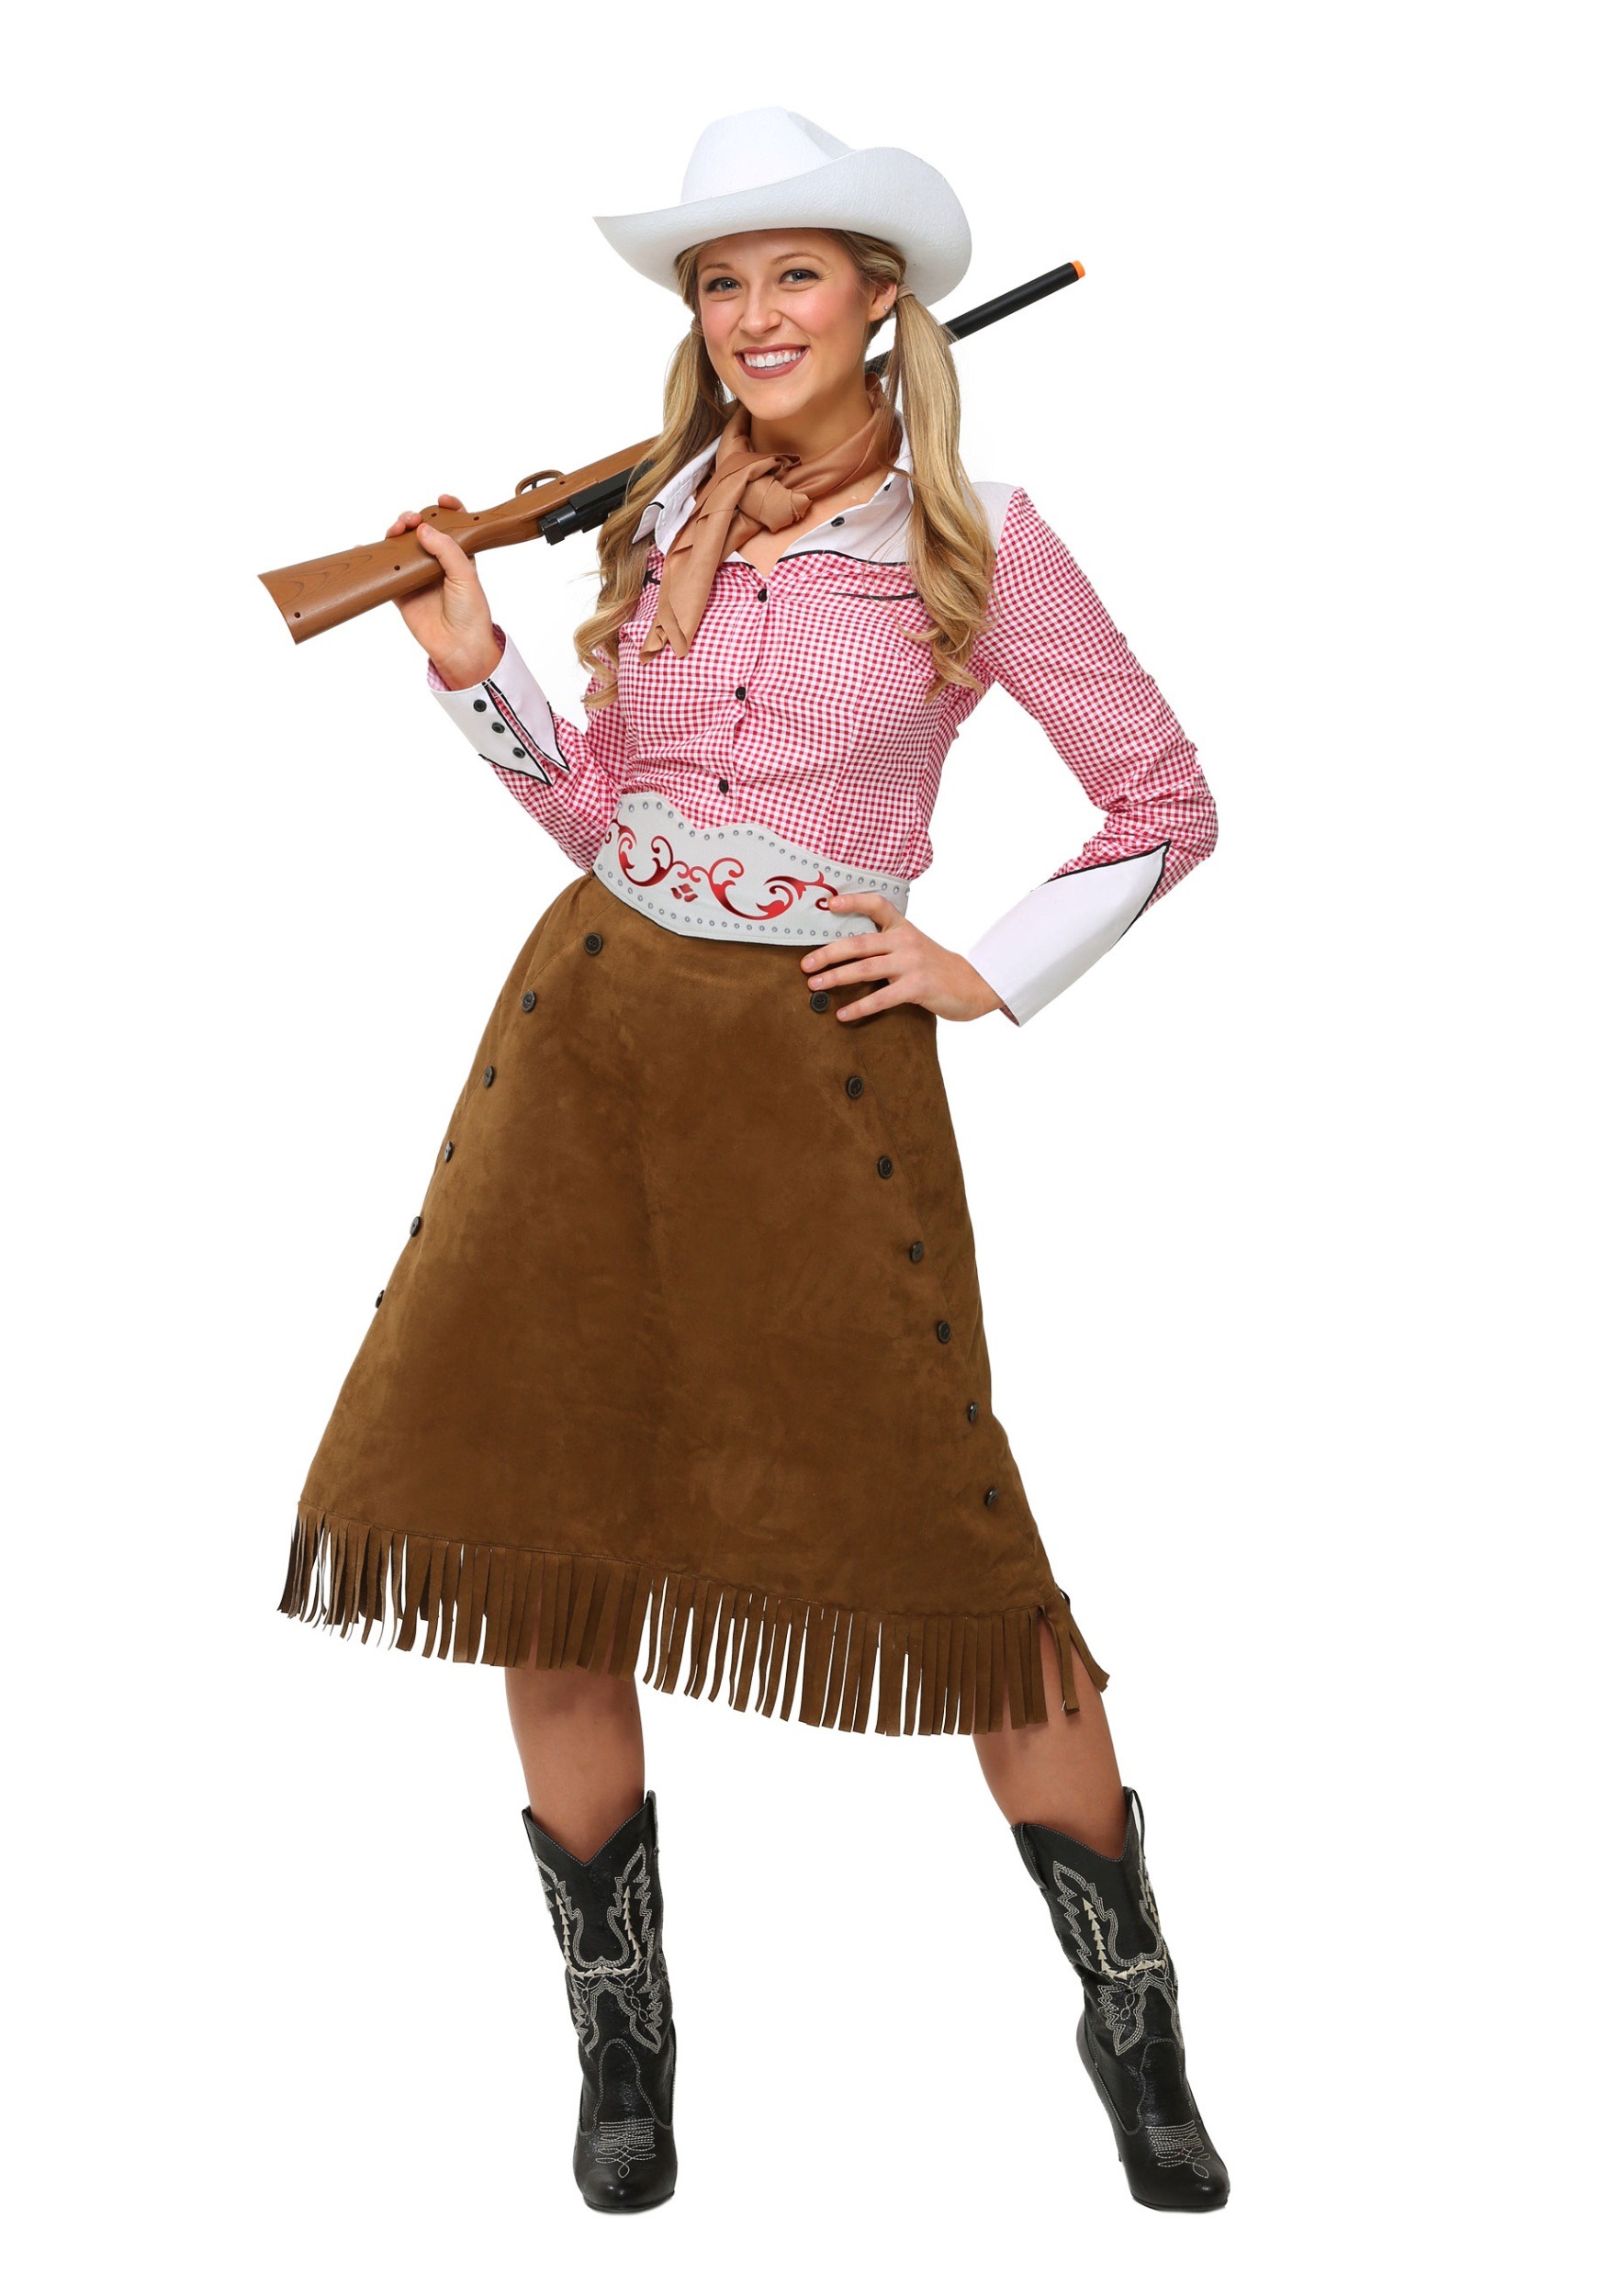 Rodeo Cowboy Costume for Women. The coolest